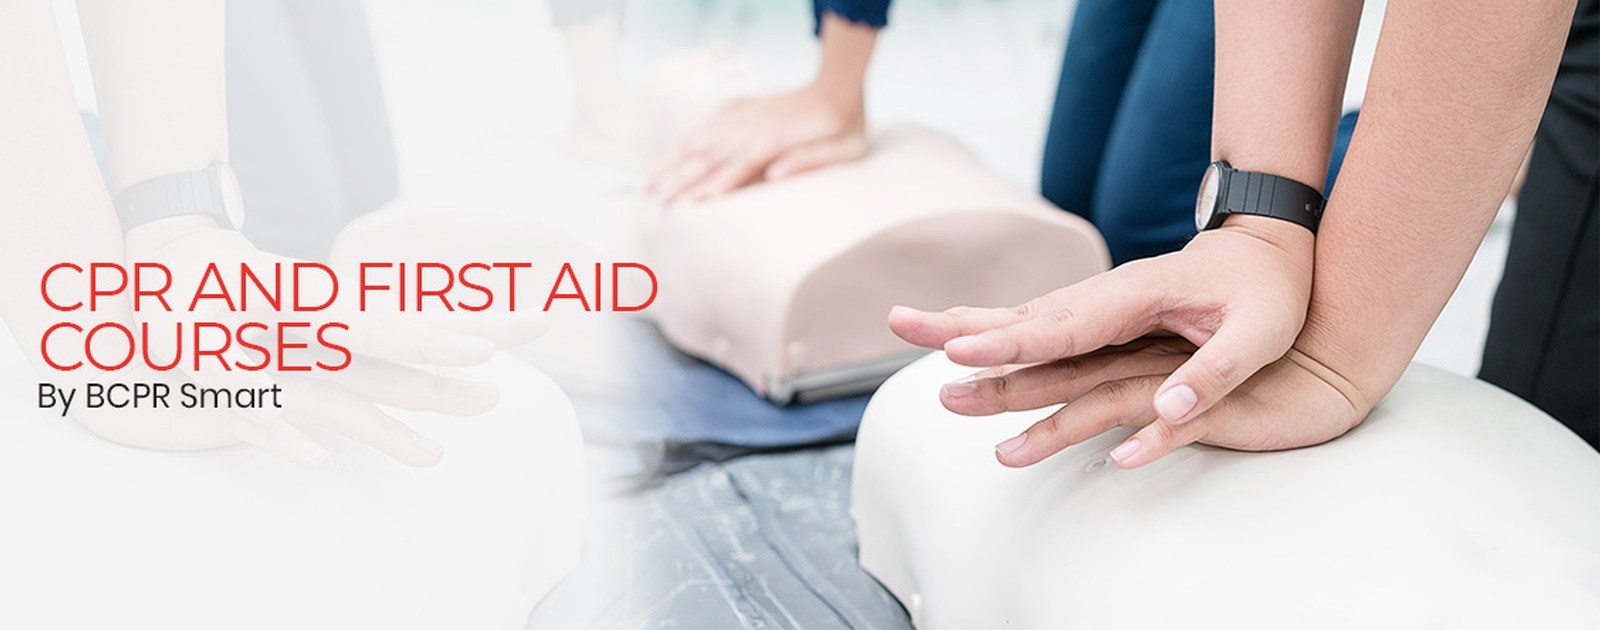 Canadian Red Cross First Aid Courses